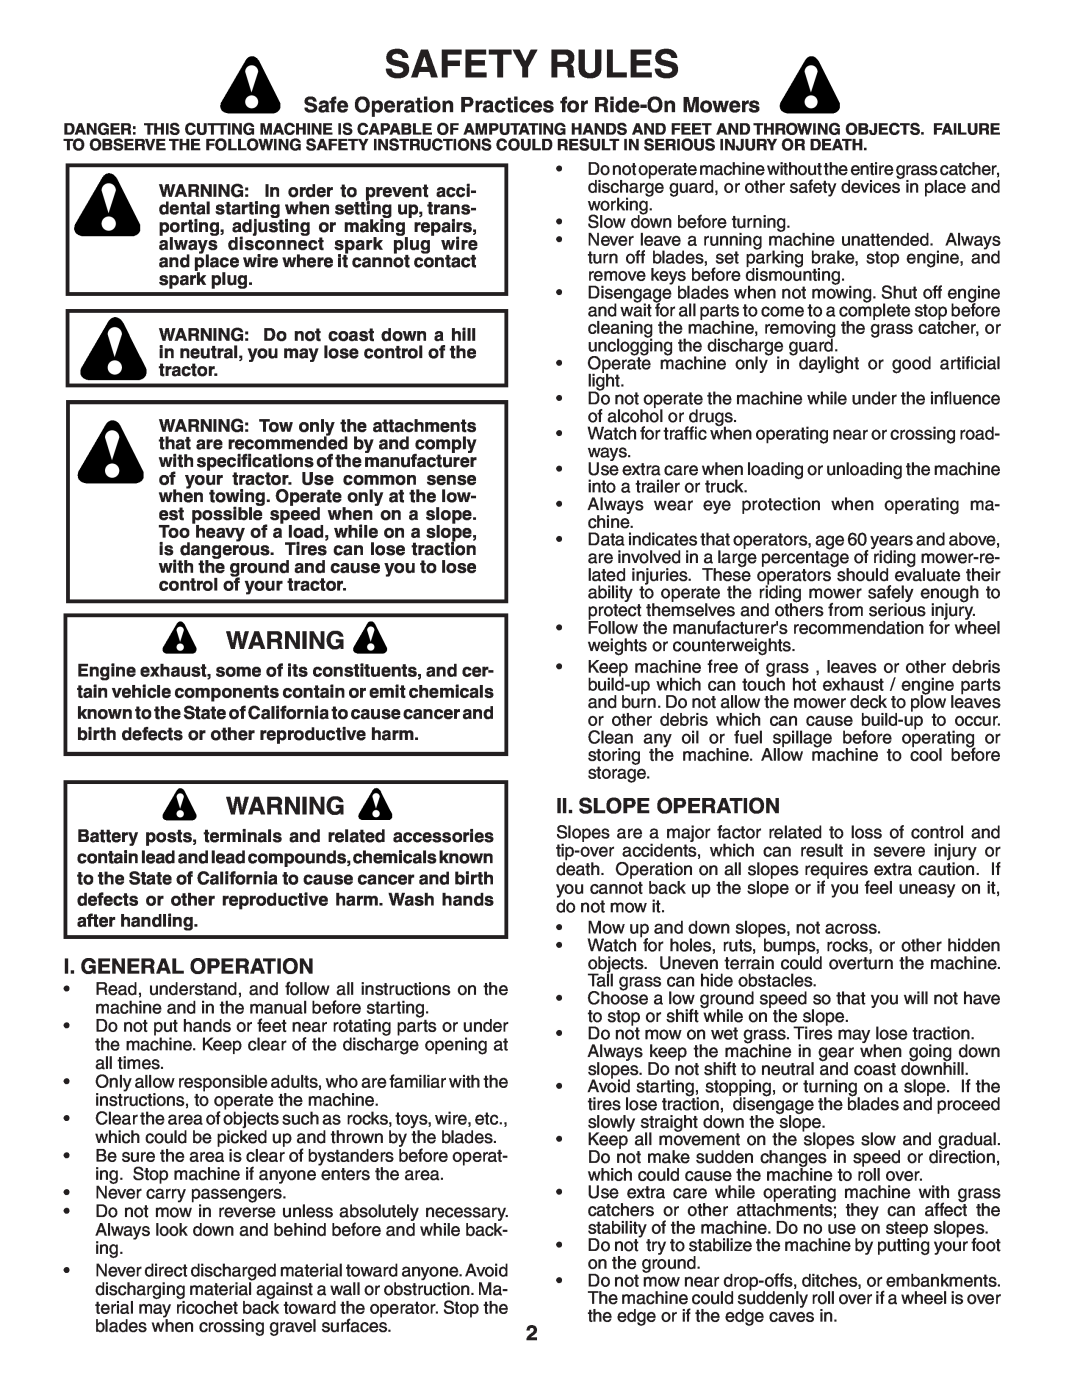 Poulan 405385 manual Safety Rules, Safe Operation Practices for Ride-On Mowers, I. General Operation, Ii. Slope Operation 